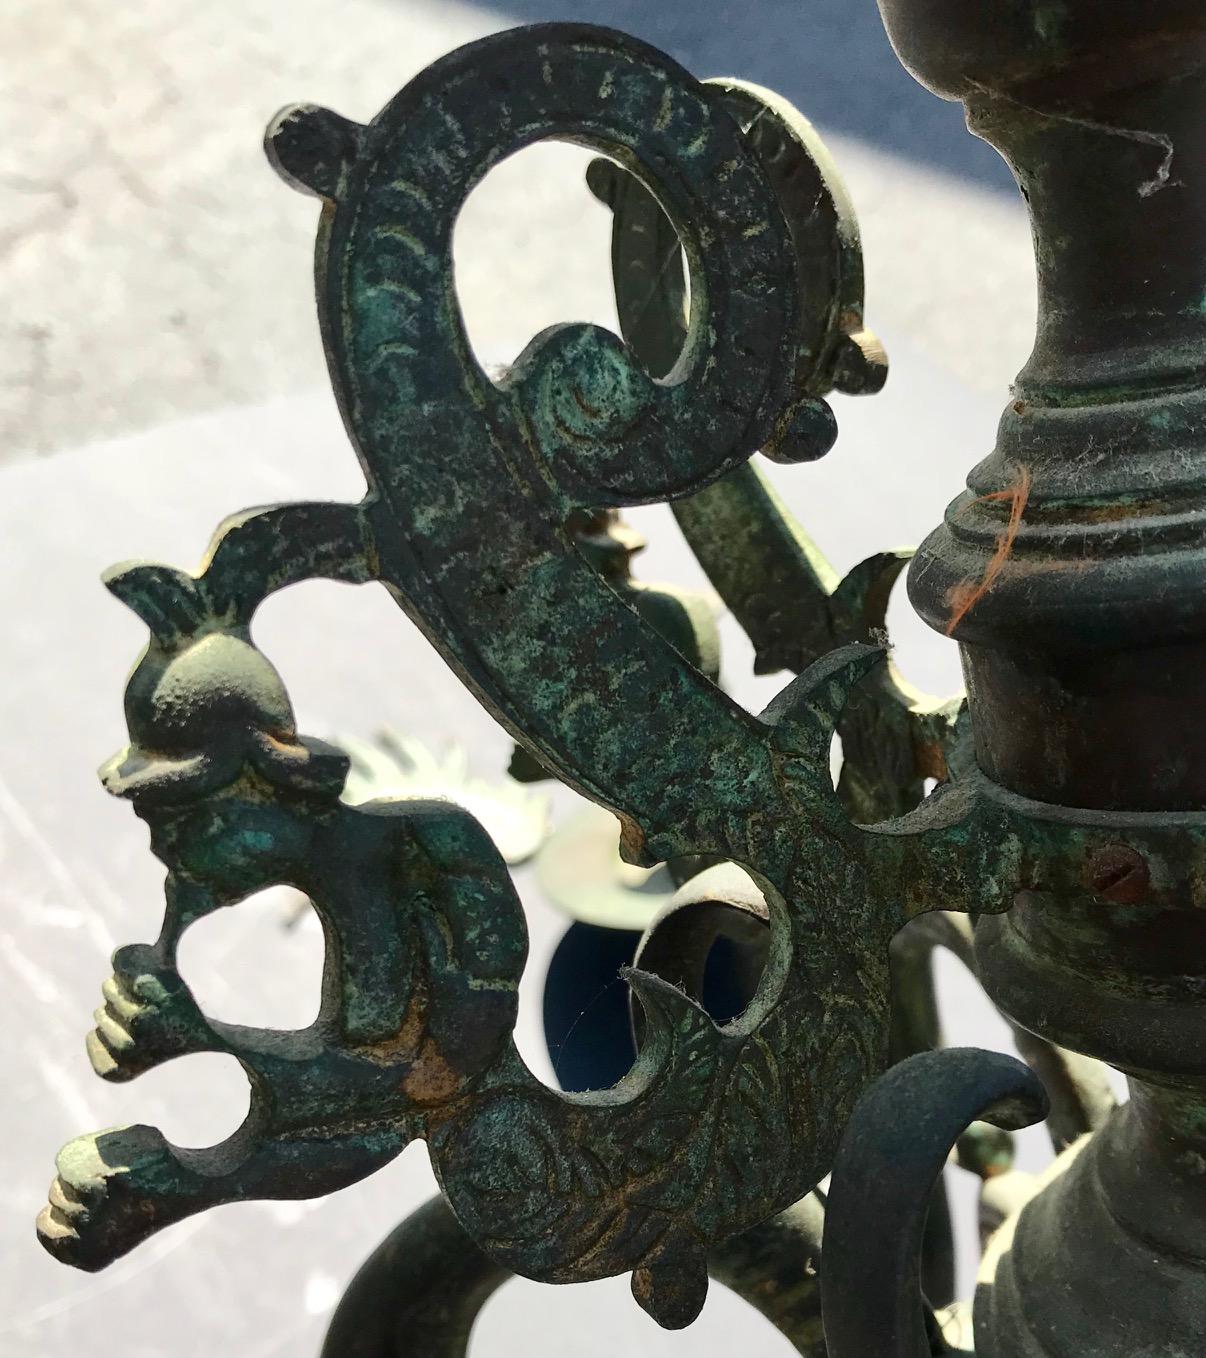 Heavy bronze chandelier with six arms. It has the original dark patina with green shading. The six scrolled arms and the top are decorated with bronze, incised cut outs of legendary Merman figures and wings. 

This chandelier is adjusted to be